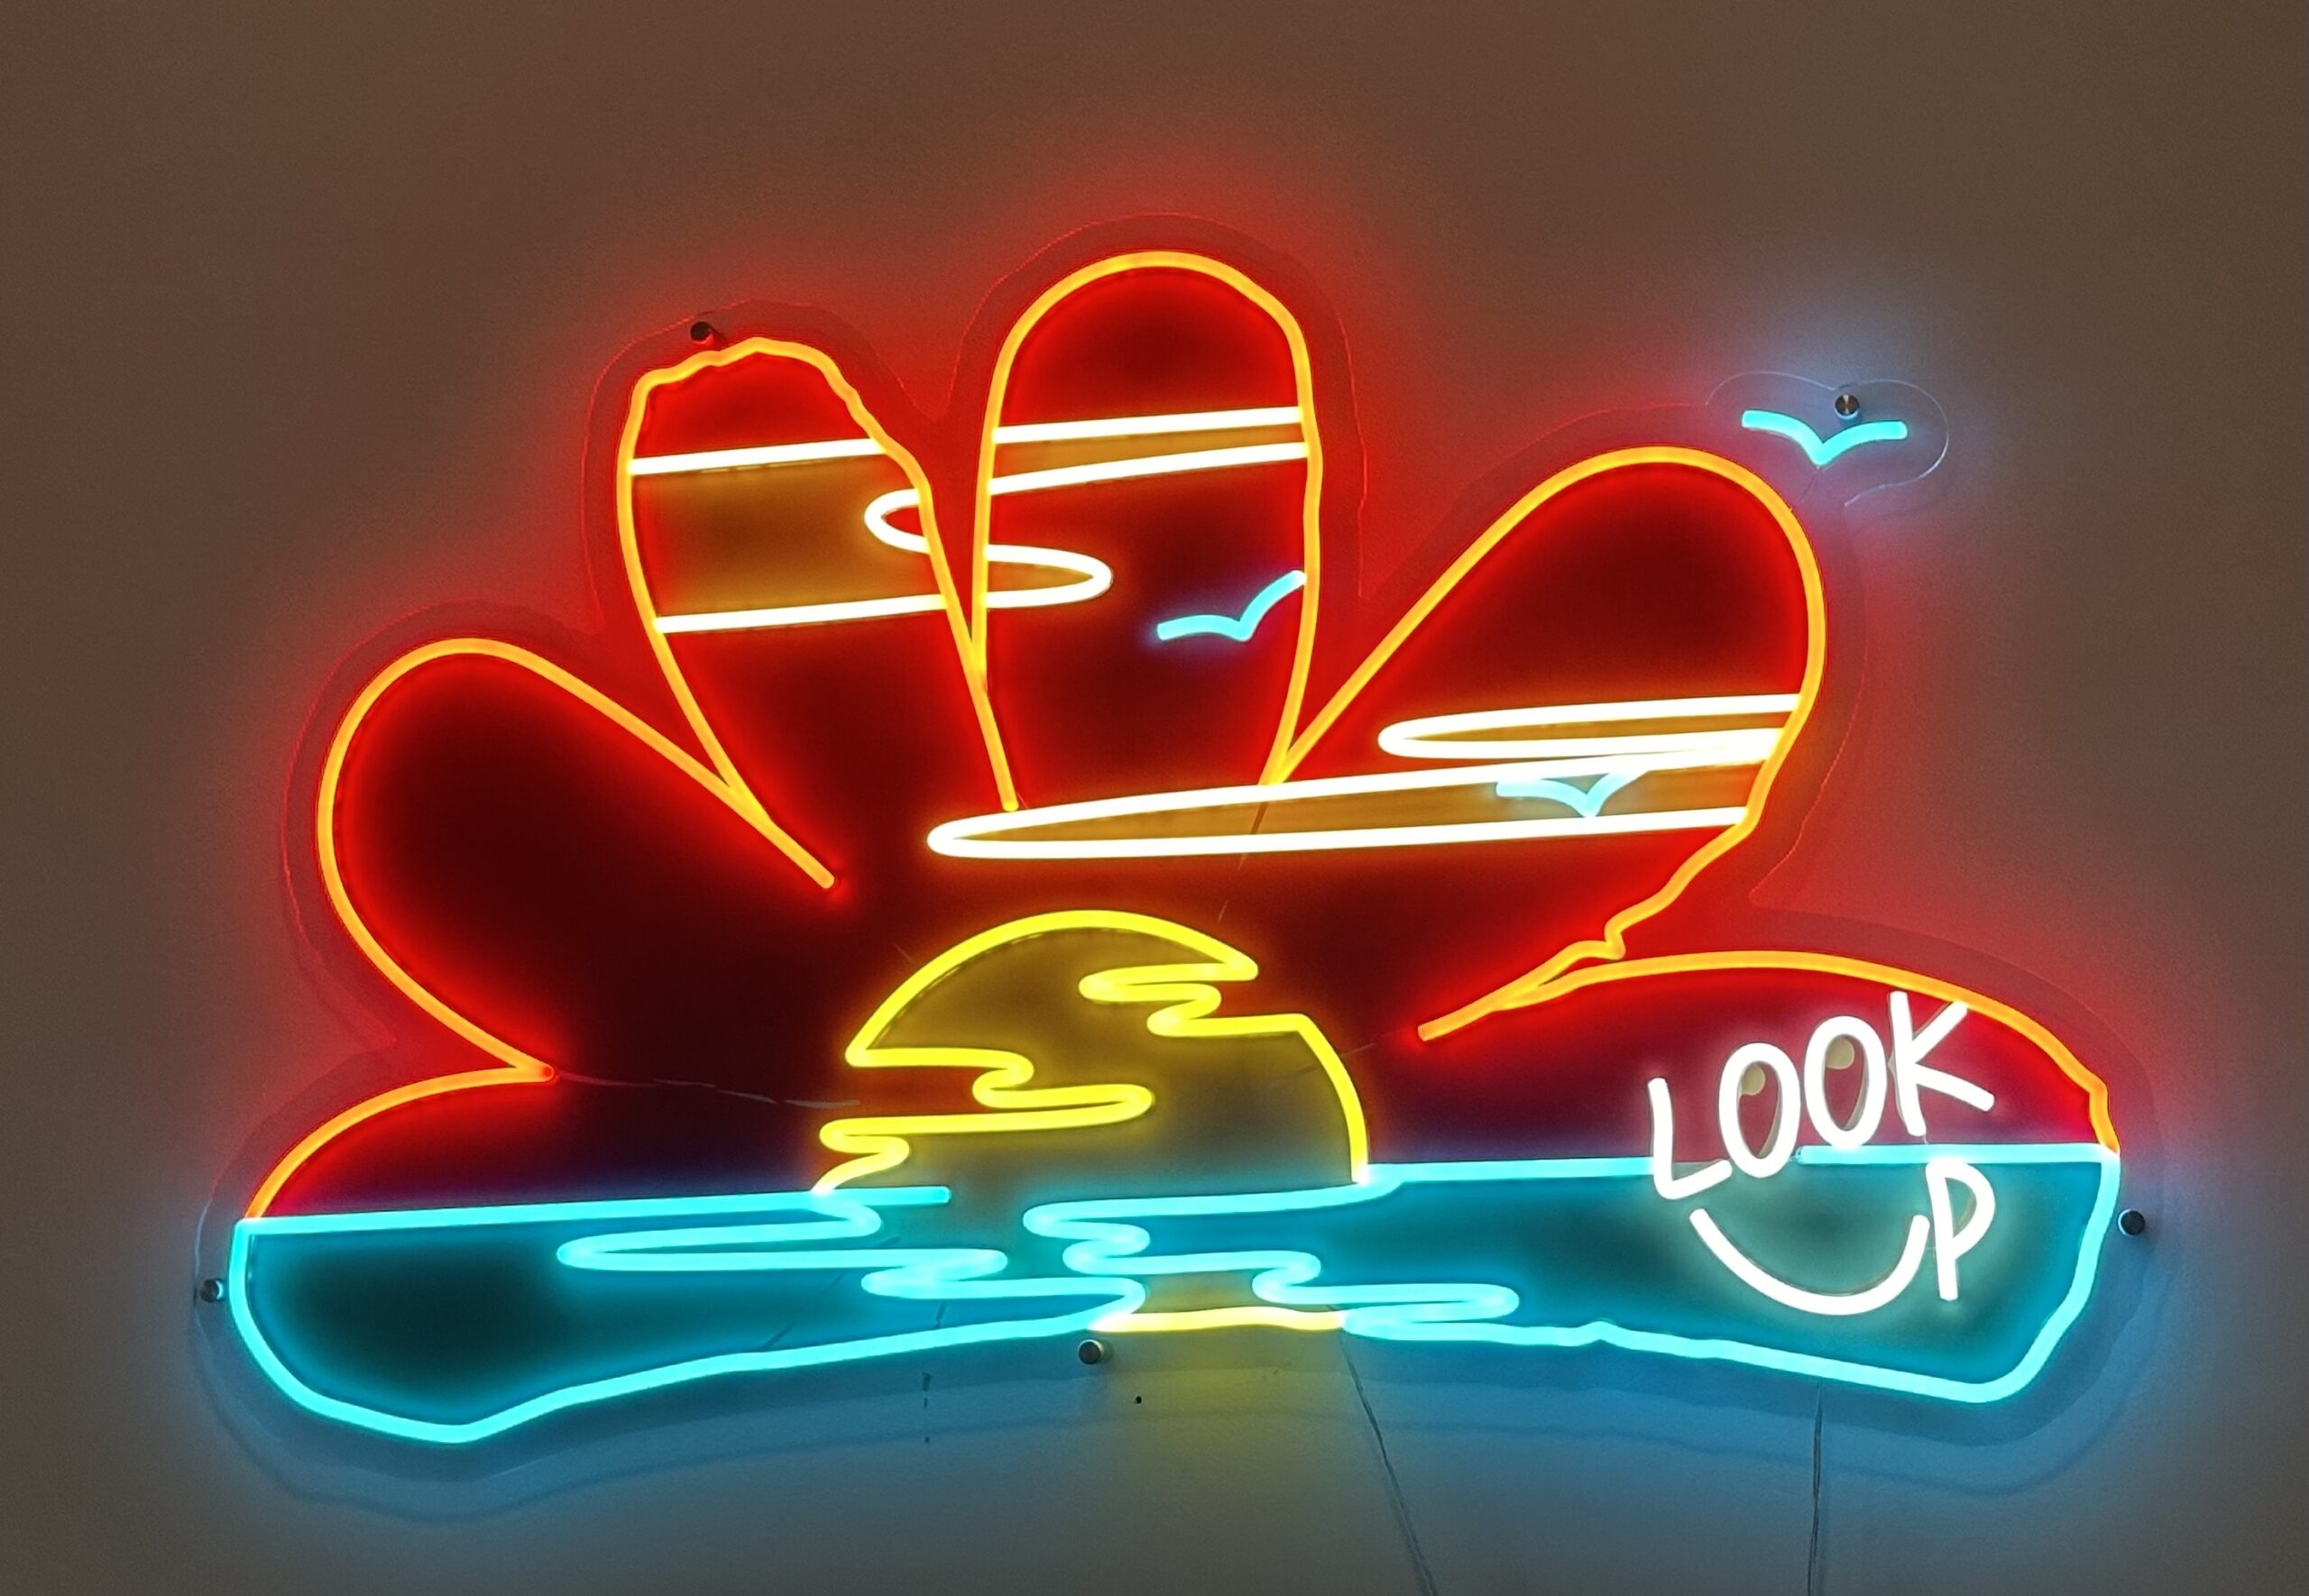 look-up-mantra-neon-sign